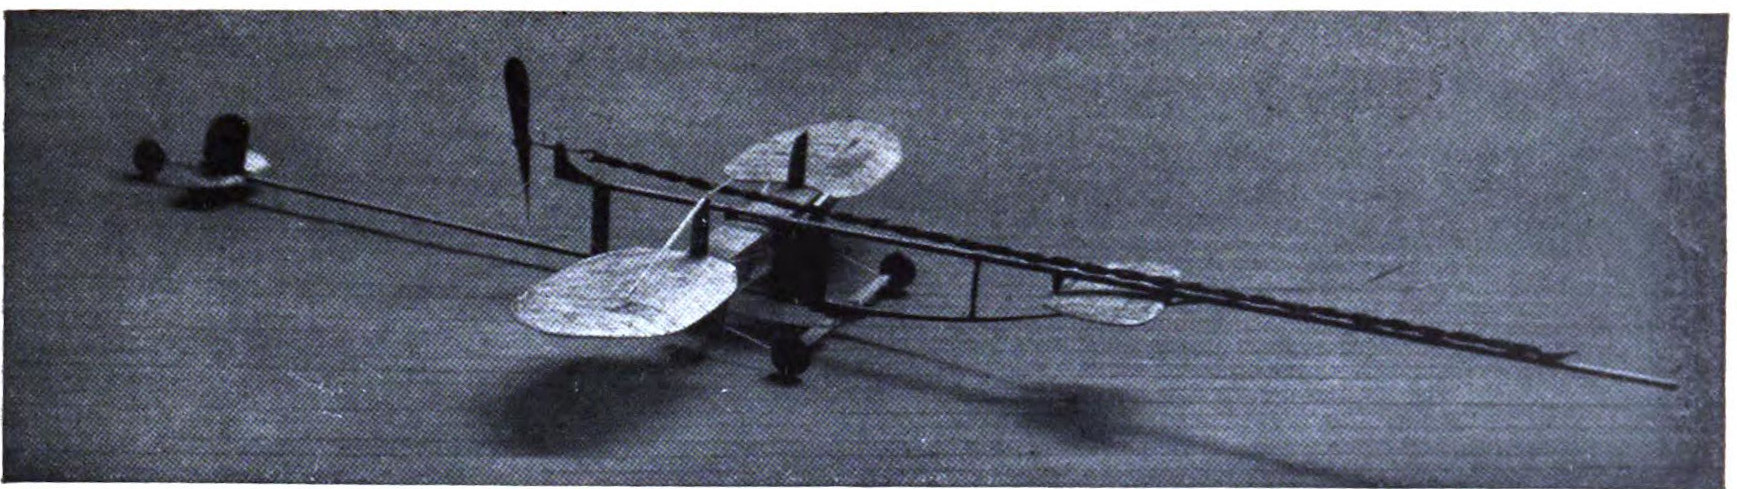 Front view of model built by W.S. Howell, Jr.